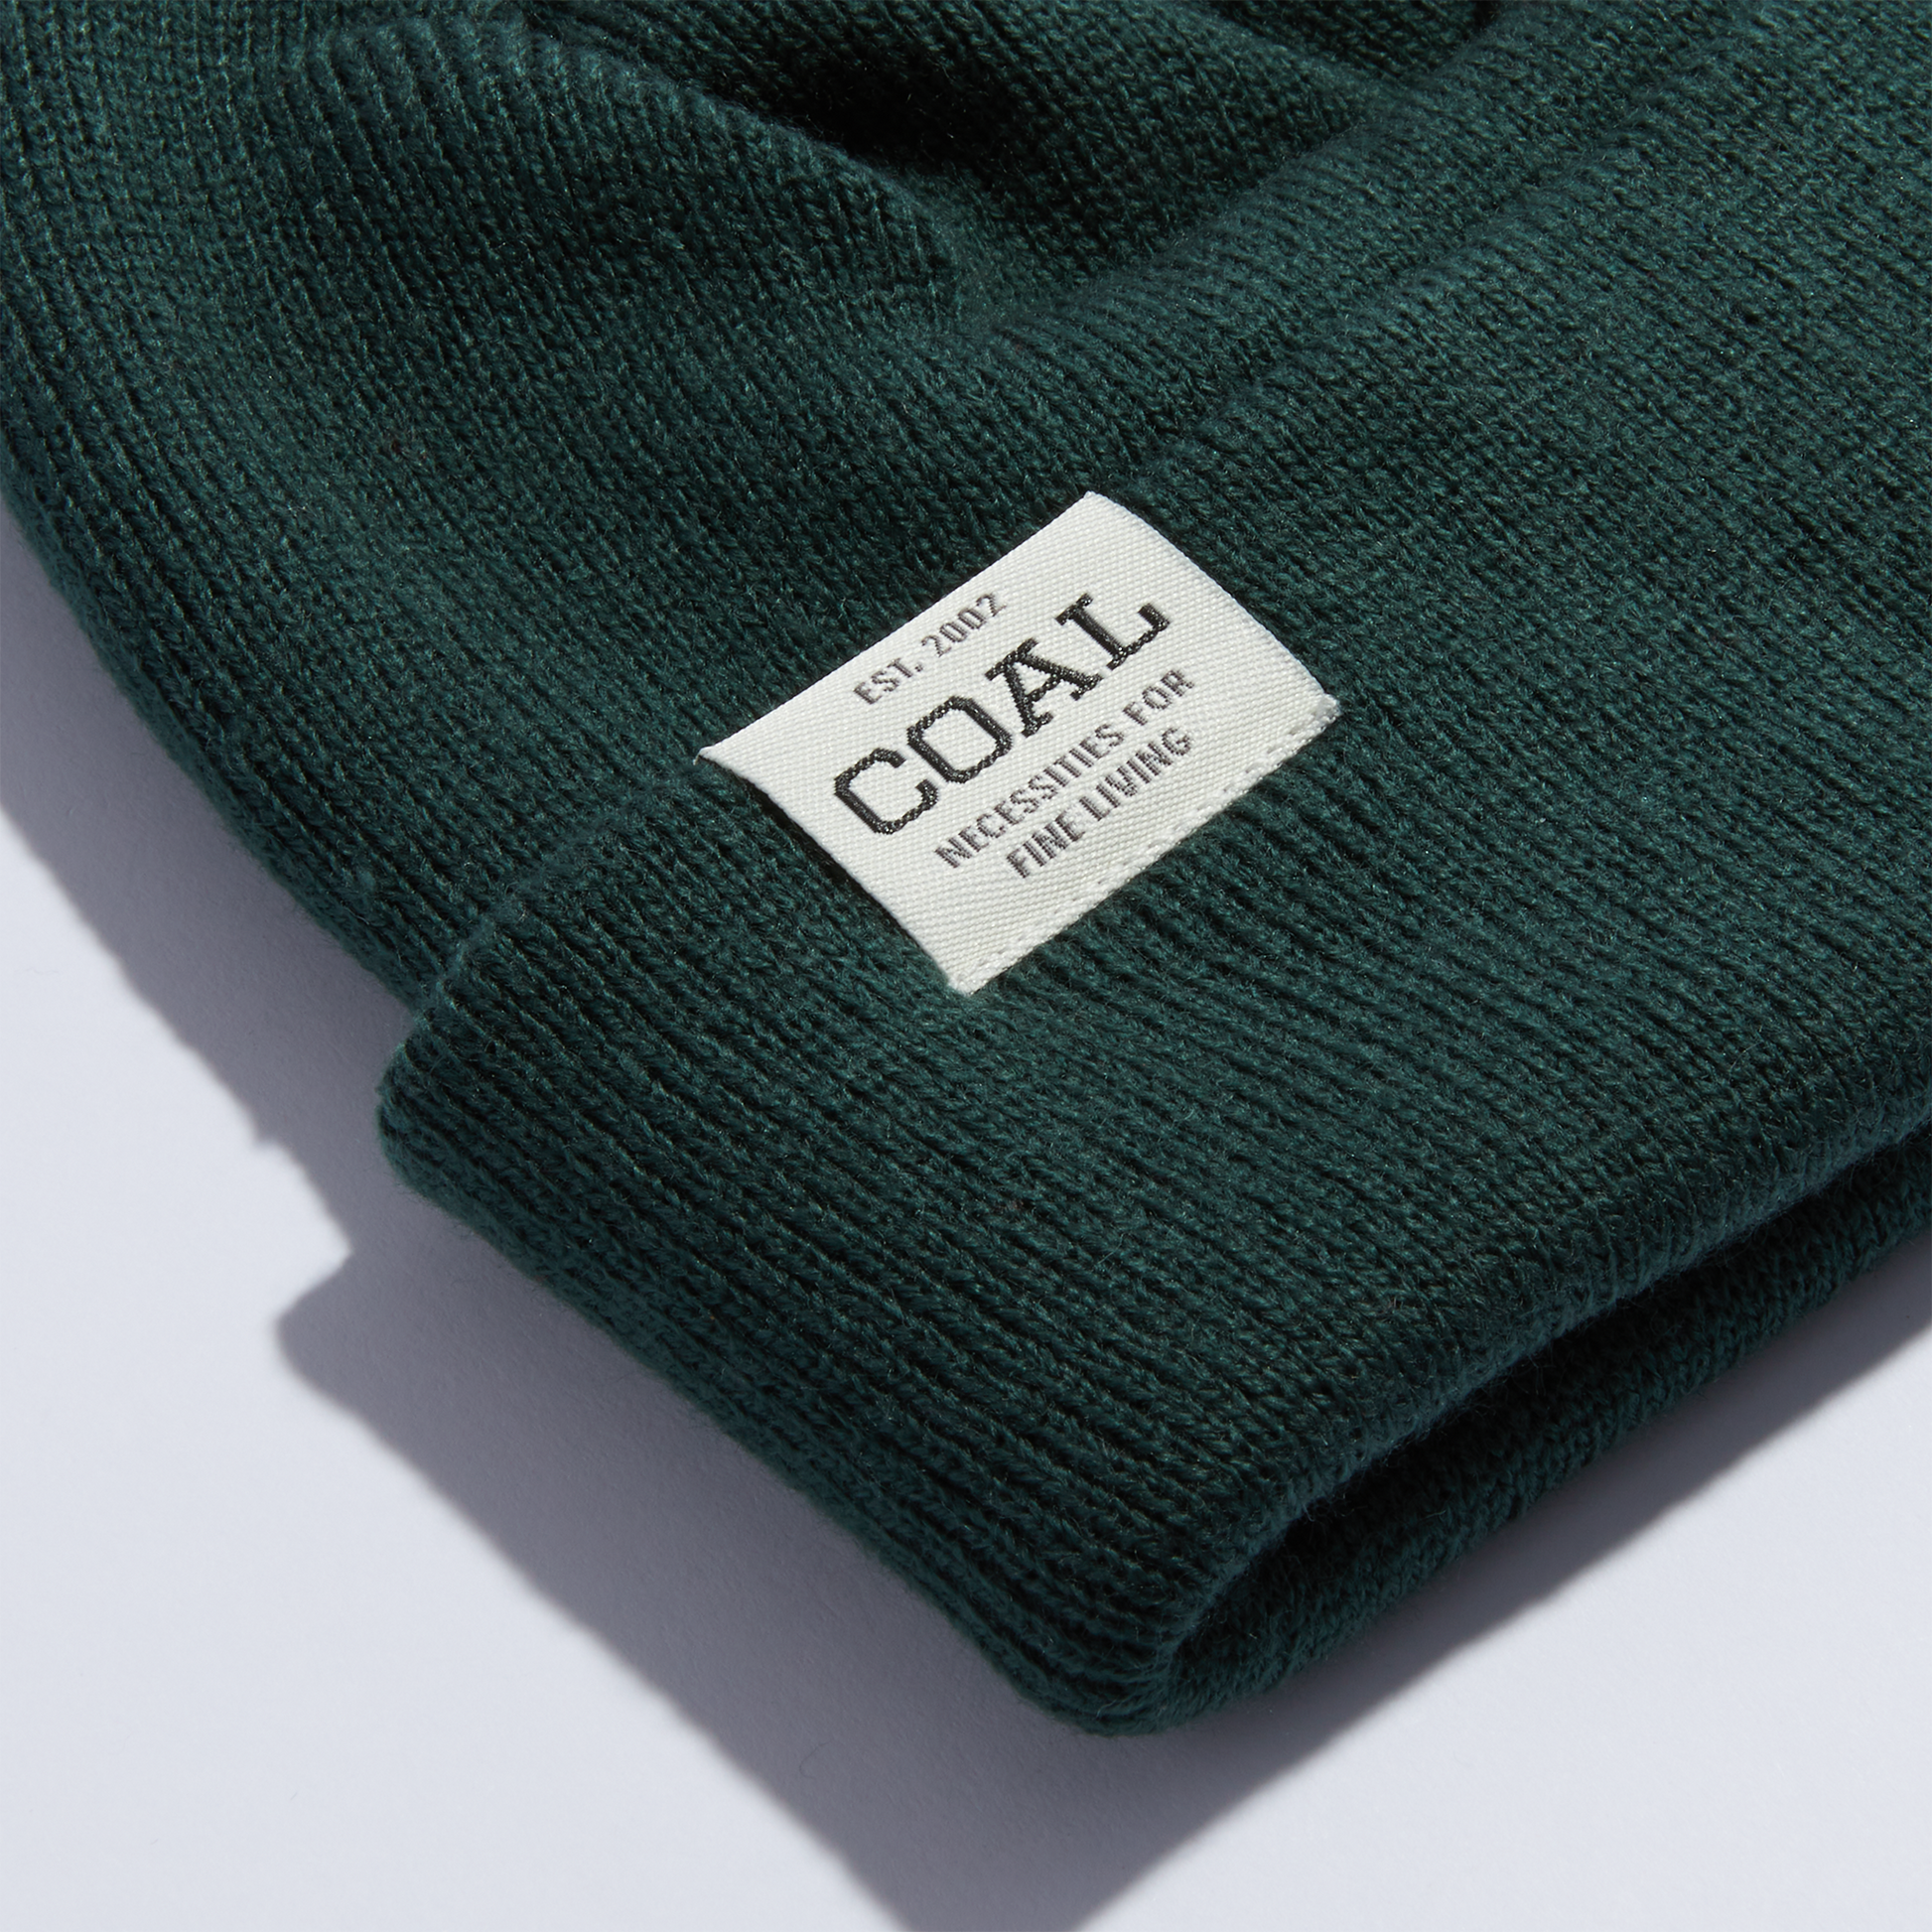 The Uniform Low Recycled Knit Cuff Beanie